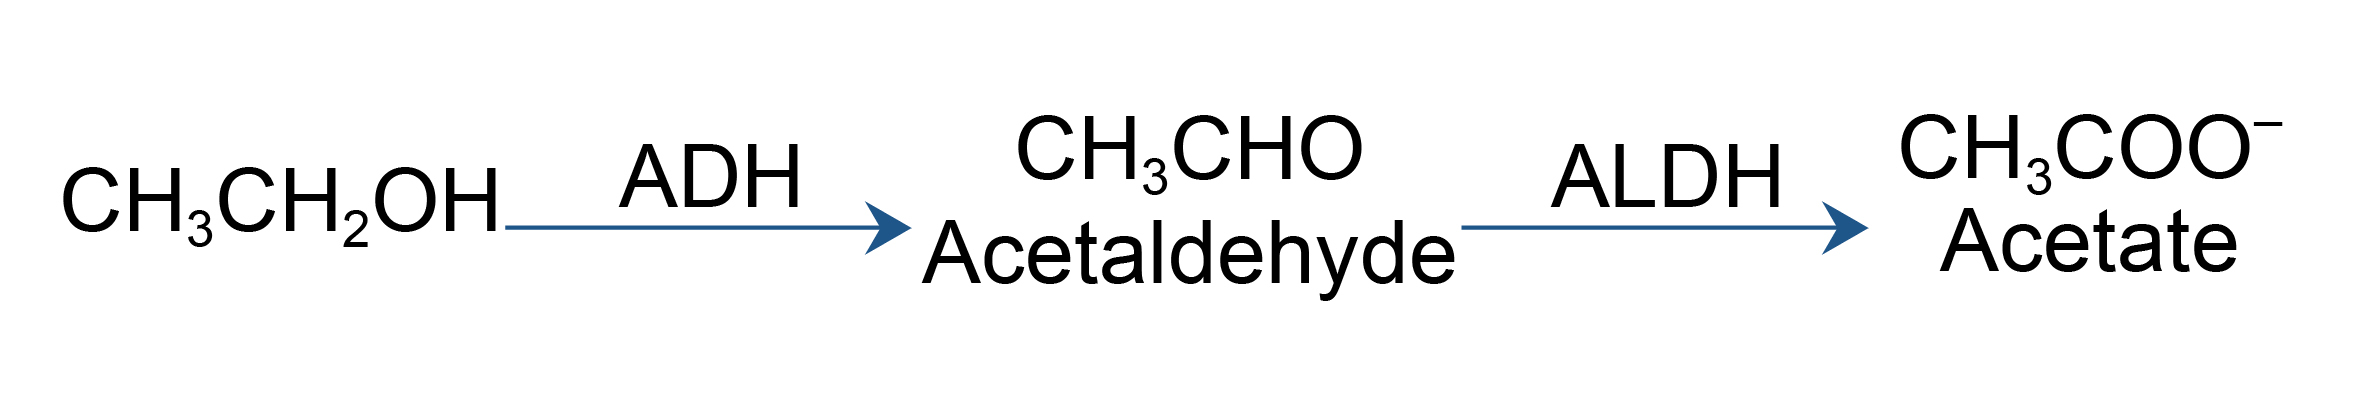 The chemical name for alcohol is ethanol (CH3CH2OH). The body processes and eliminates ethanol in separate steps. Chemicals called enzymes help to break apart the ethanol molecule into other compounds (or metabolites), which can be processed more easily by the body. Some of these intermediate metabolites can have harmful effects on the body. Most of the ethanol in the body is broken down in the liver by an enzyme called alcohol dehydrogenase (ADH), which transforms ethanol into a toxic compound called aceta